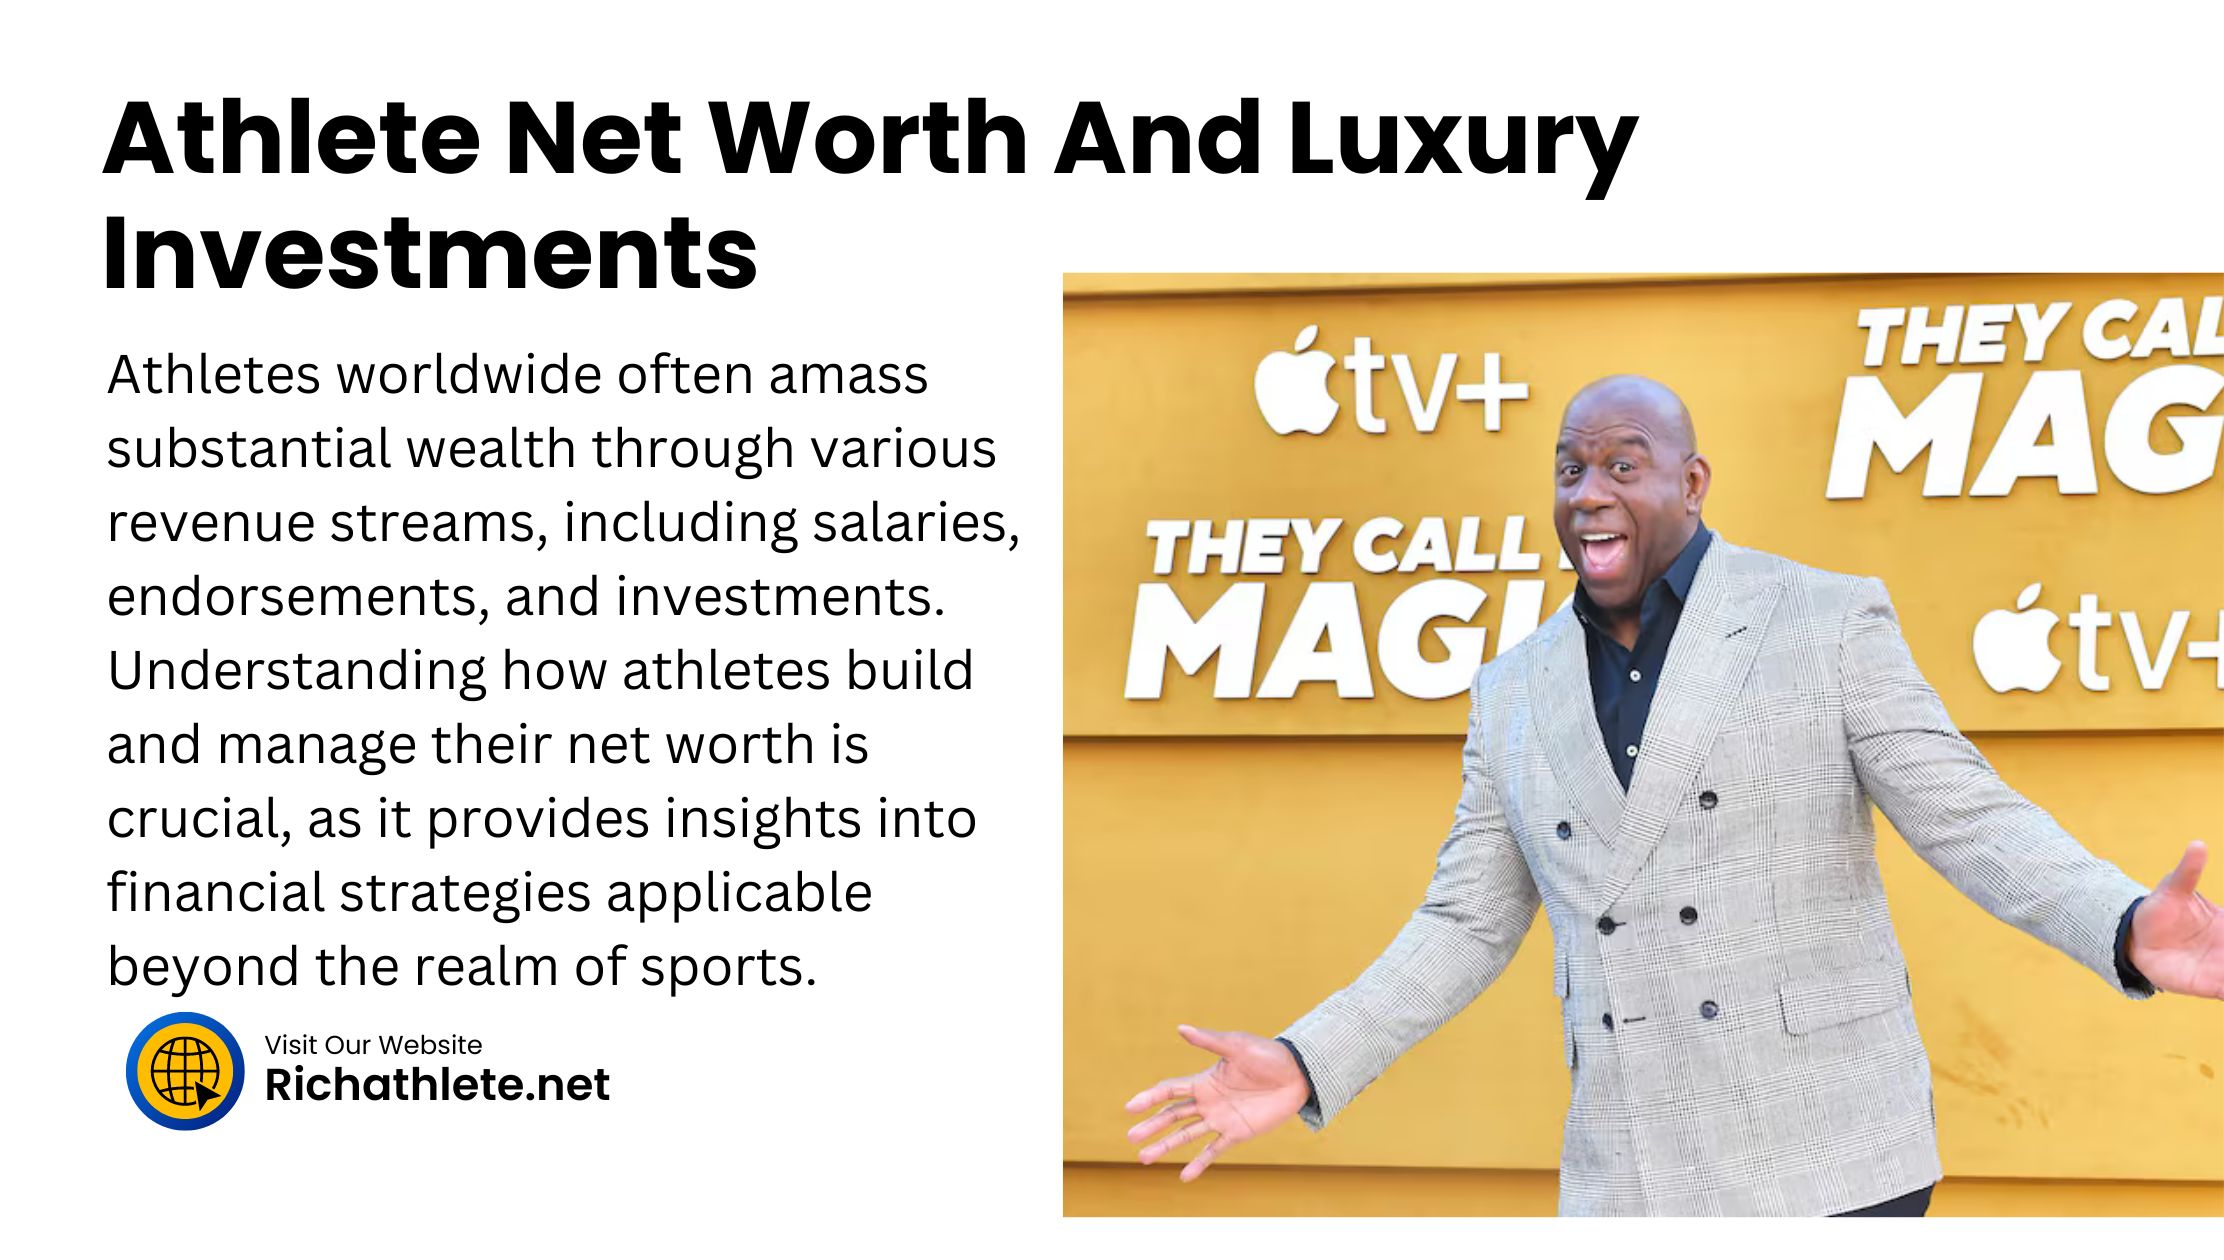 Athlete Net Worth And Luxury Investments